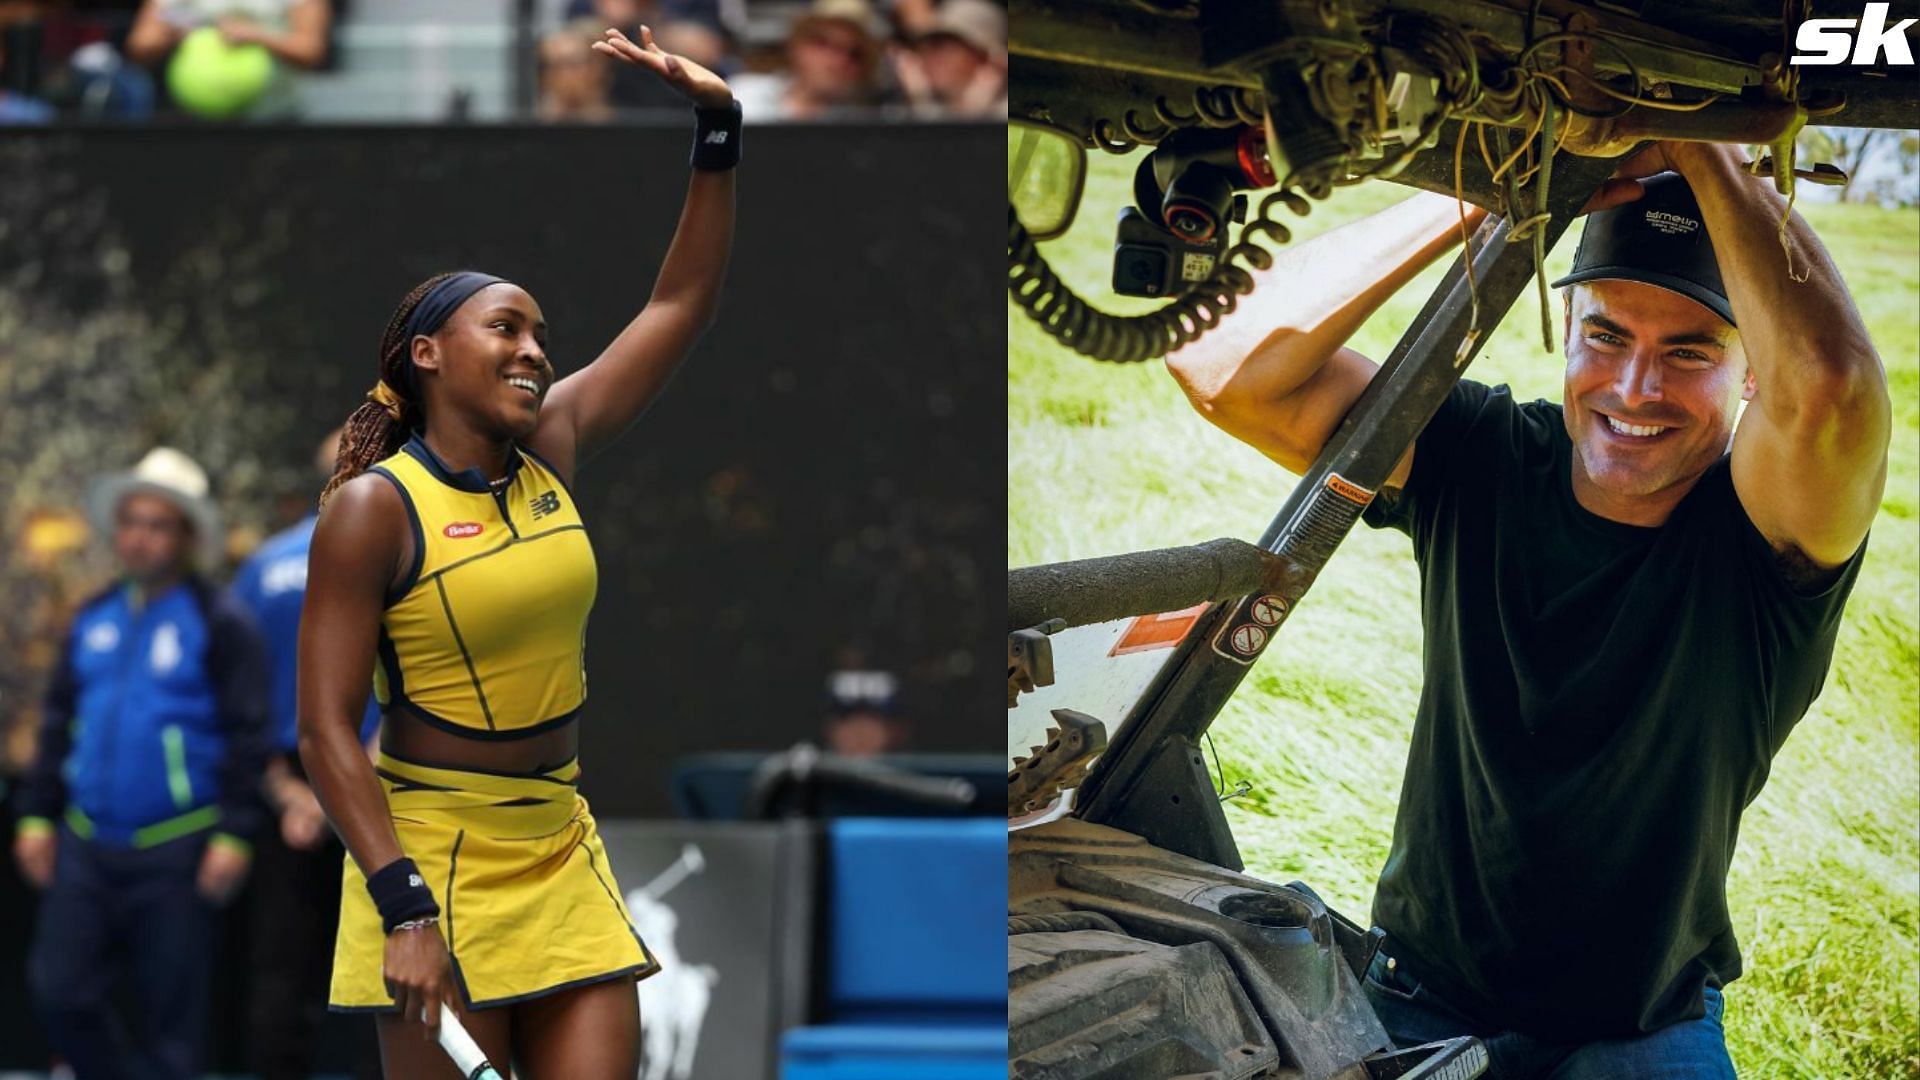 Coco Gauff and American actor Zac Efron